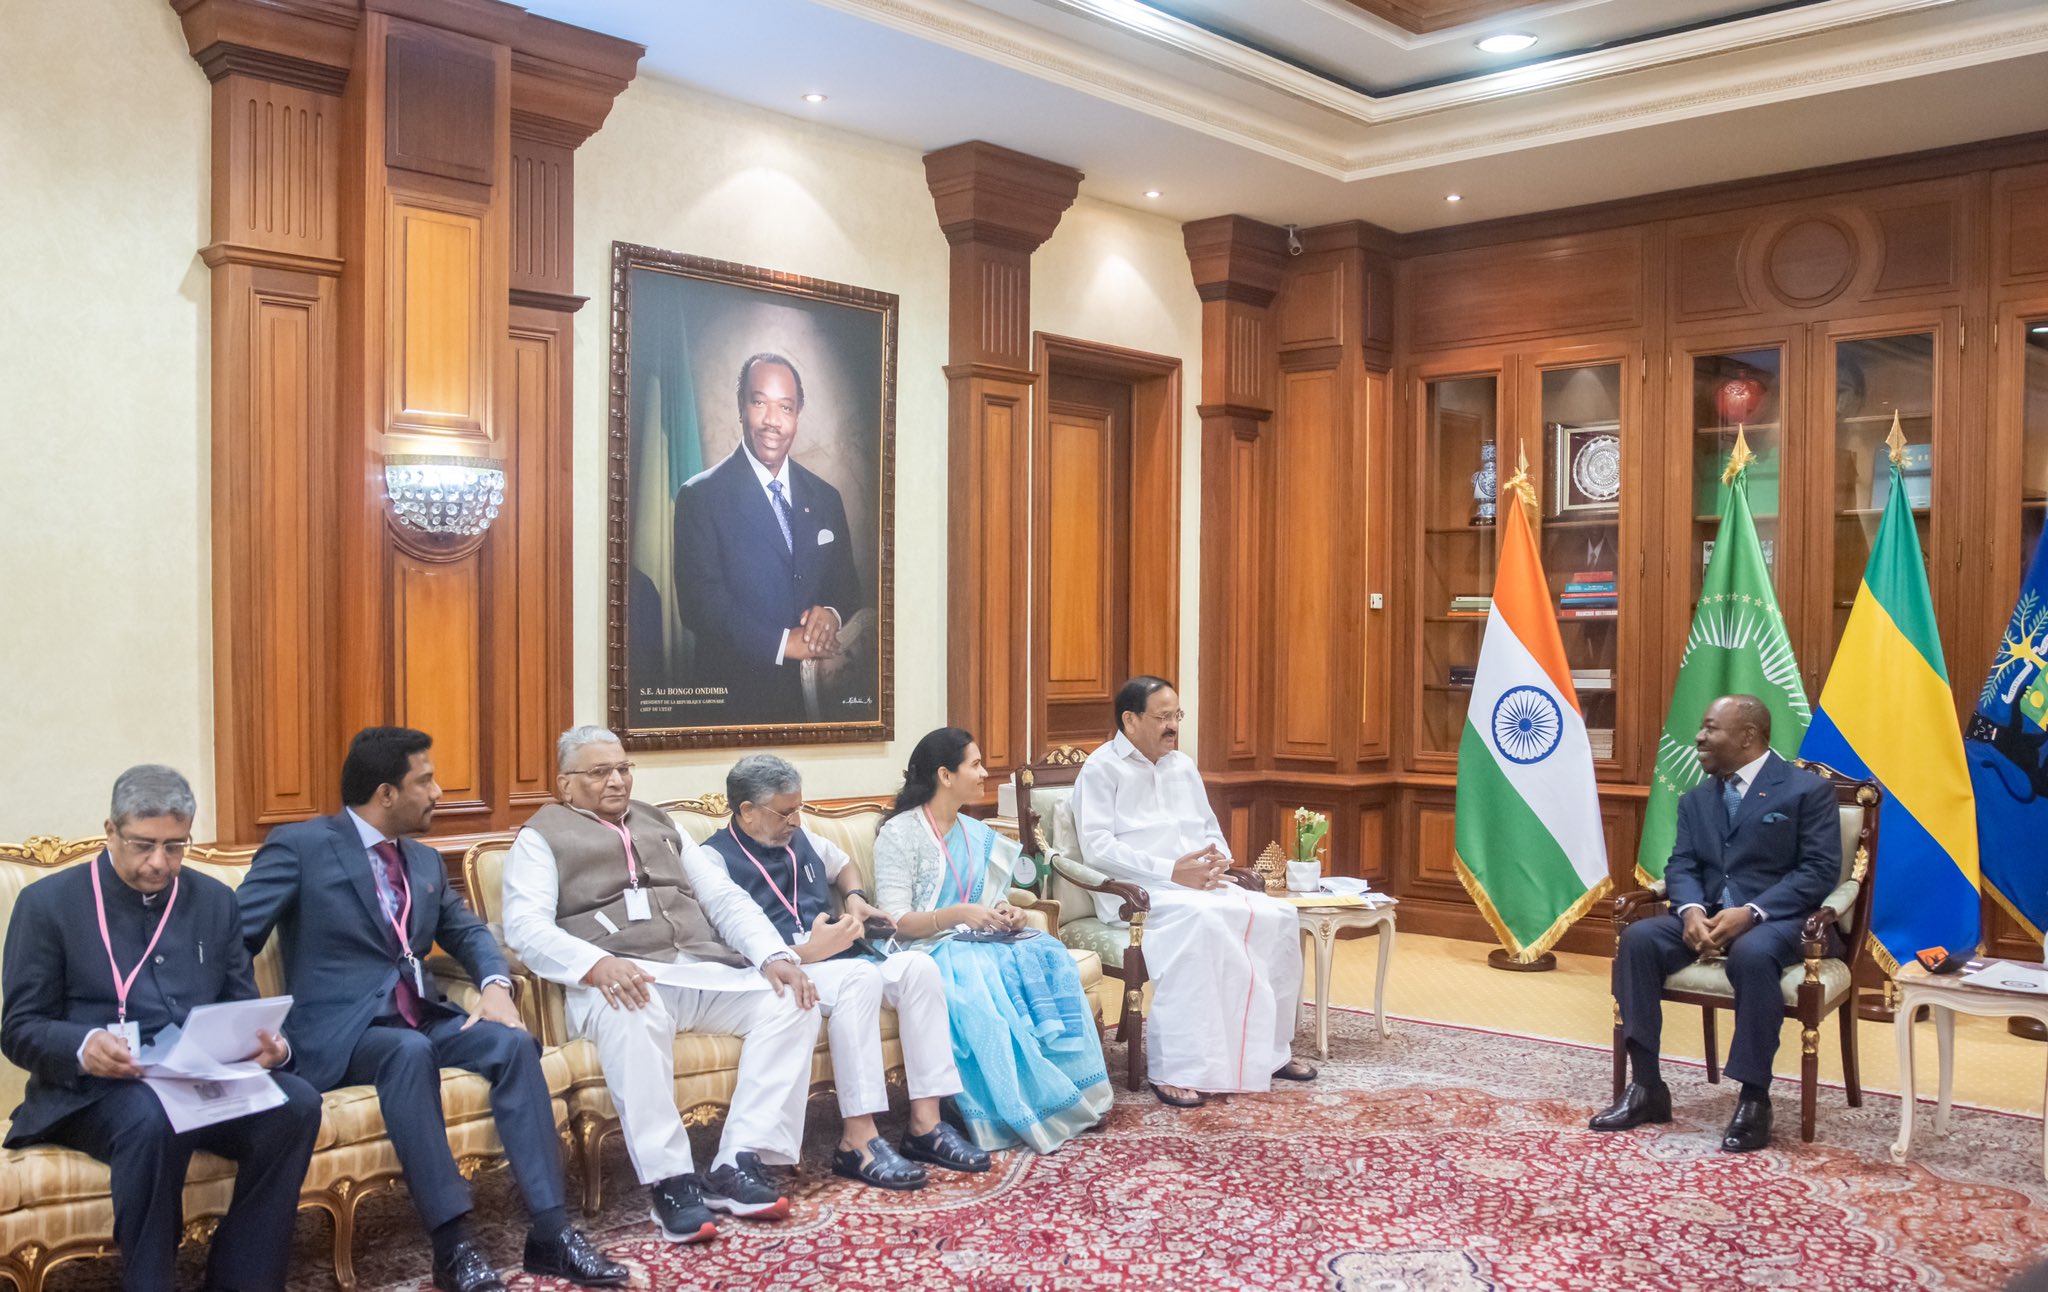 VP Naidu calls for exploring India-Gabon cooperation in green energy, health and agriculture